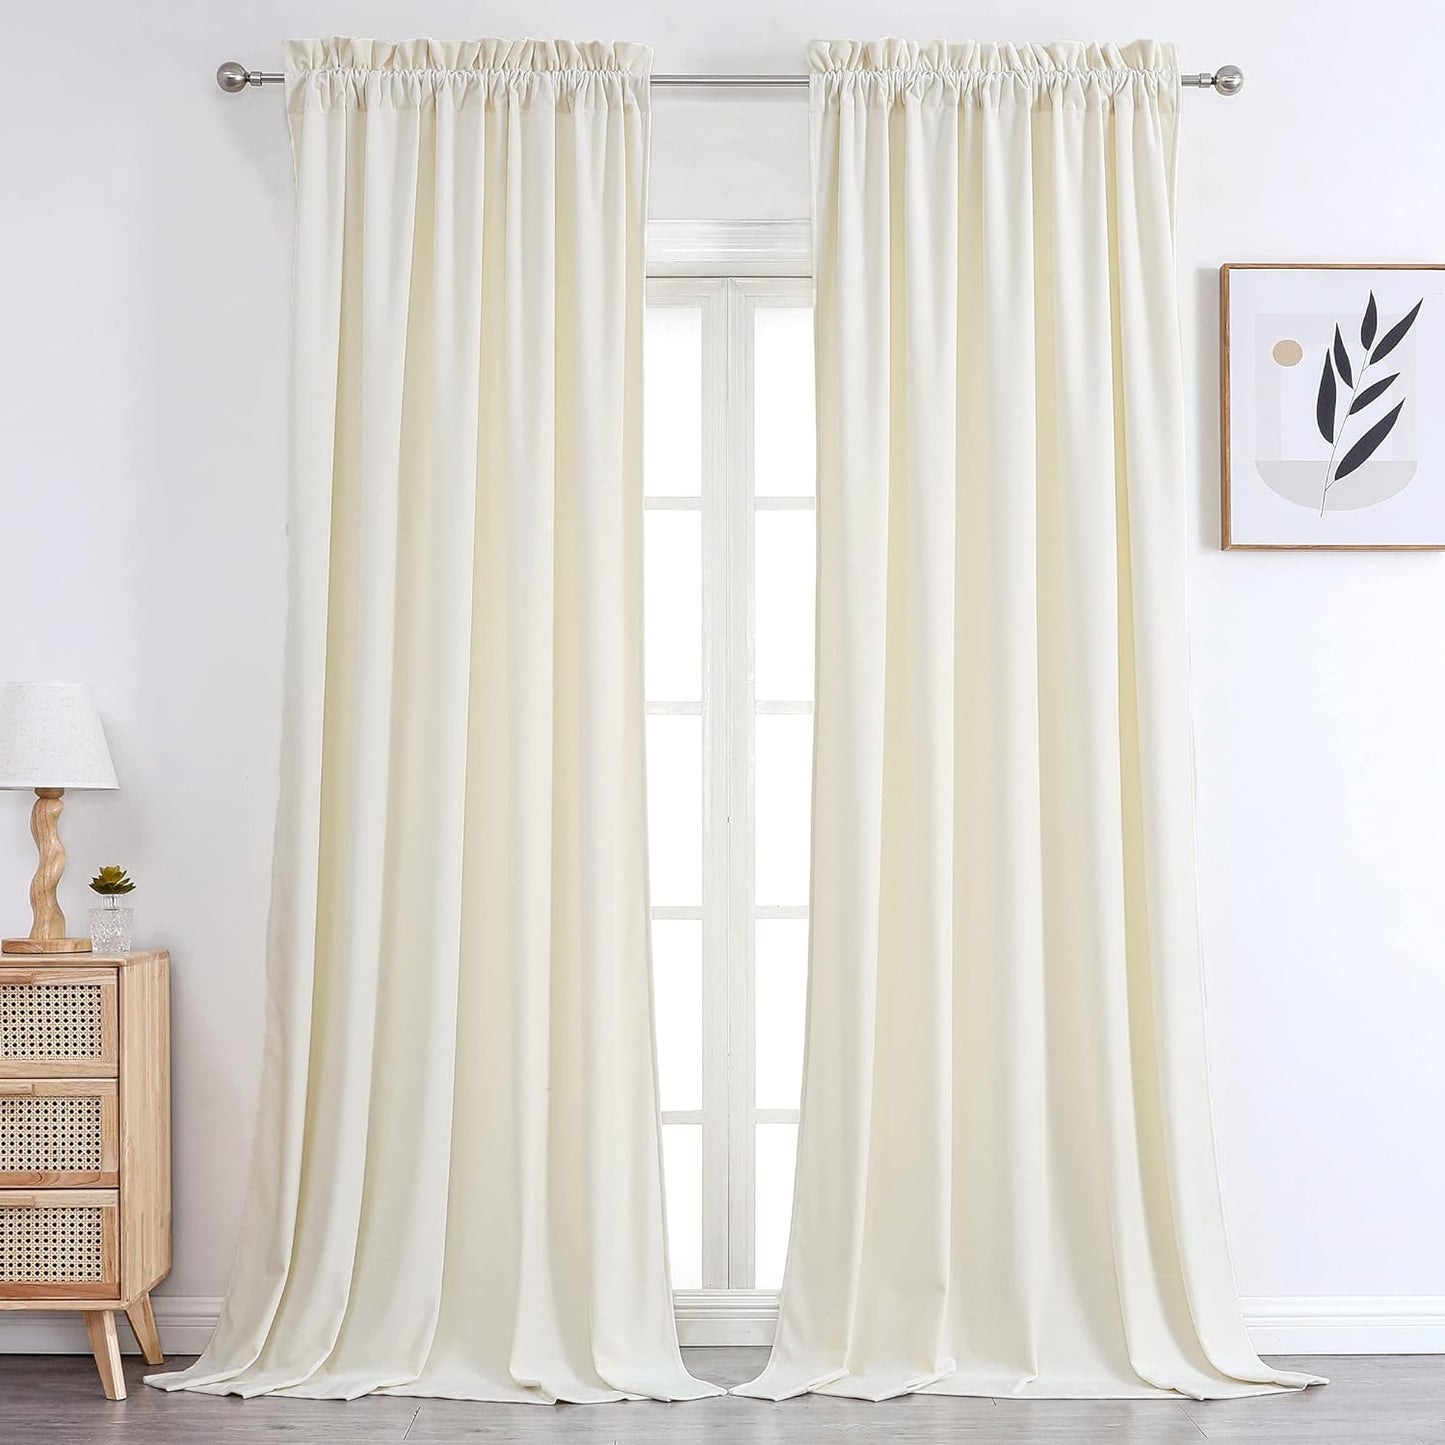 Benedeco Green Velvet Curtains for Bedroom Window, Super Soft Luxury Drapes, Room Darkening Thermal Insulated Rod Pocket Curtain for Living Room, W52 by L84 Inches, 2 Panels  Benedeco Ivorywhite W52 * L63 | 2 Panels 